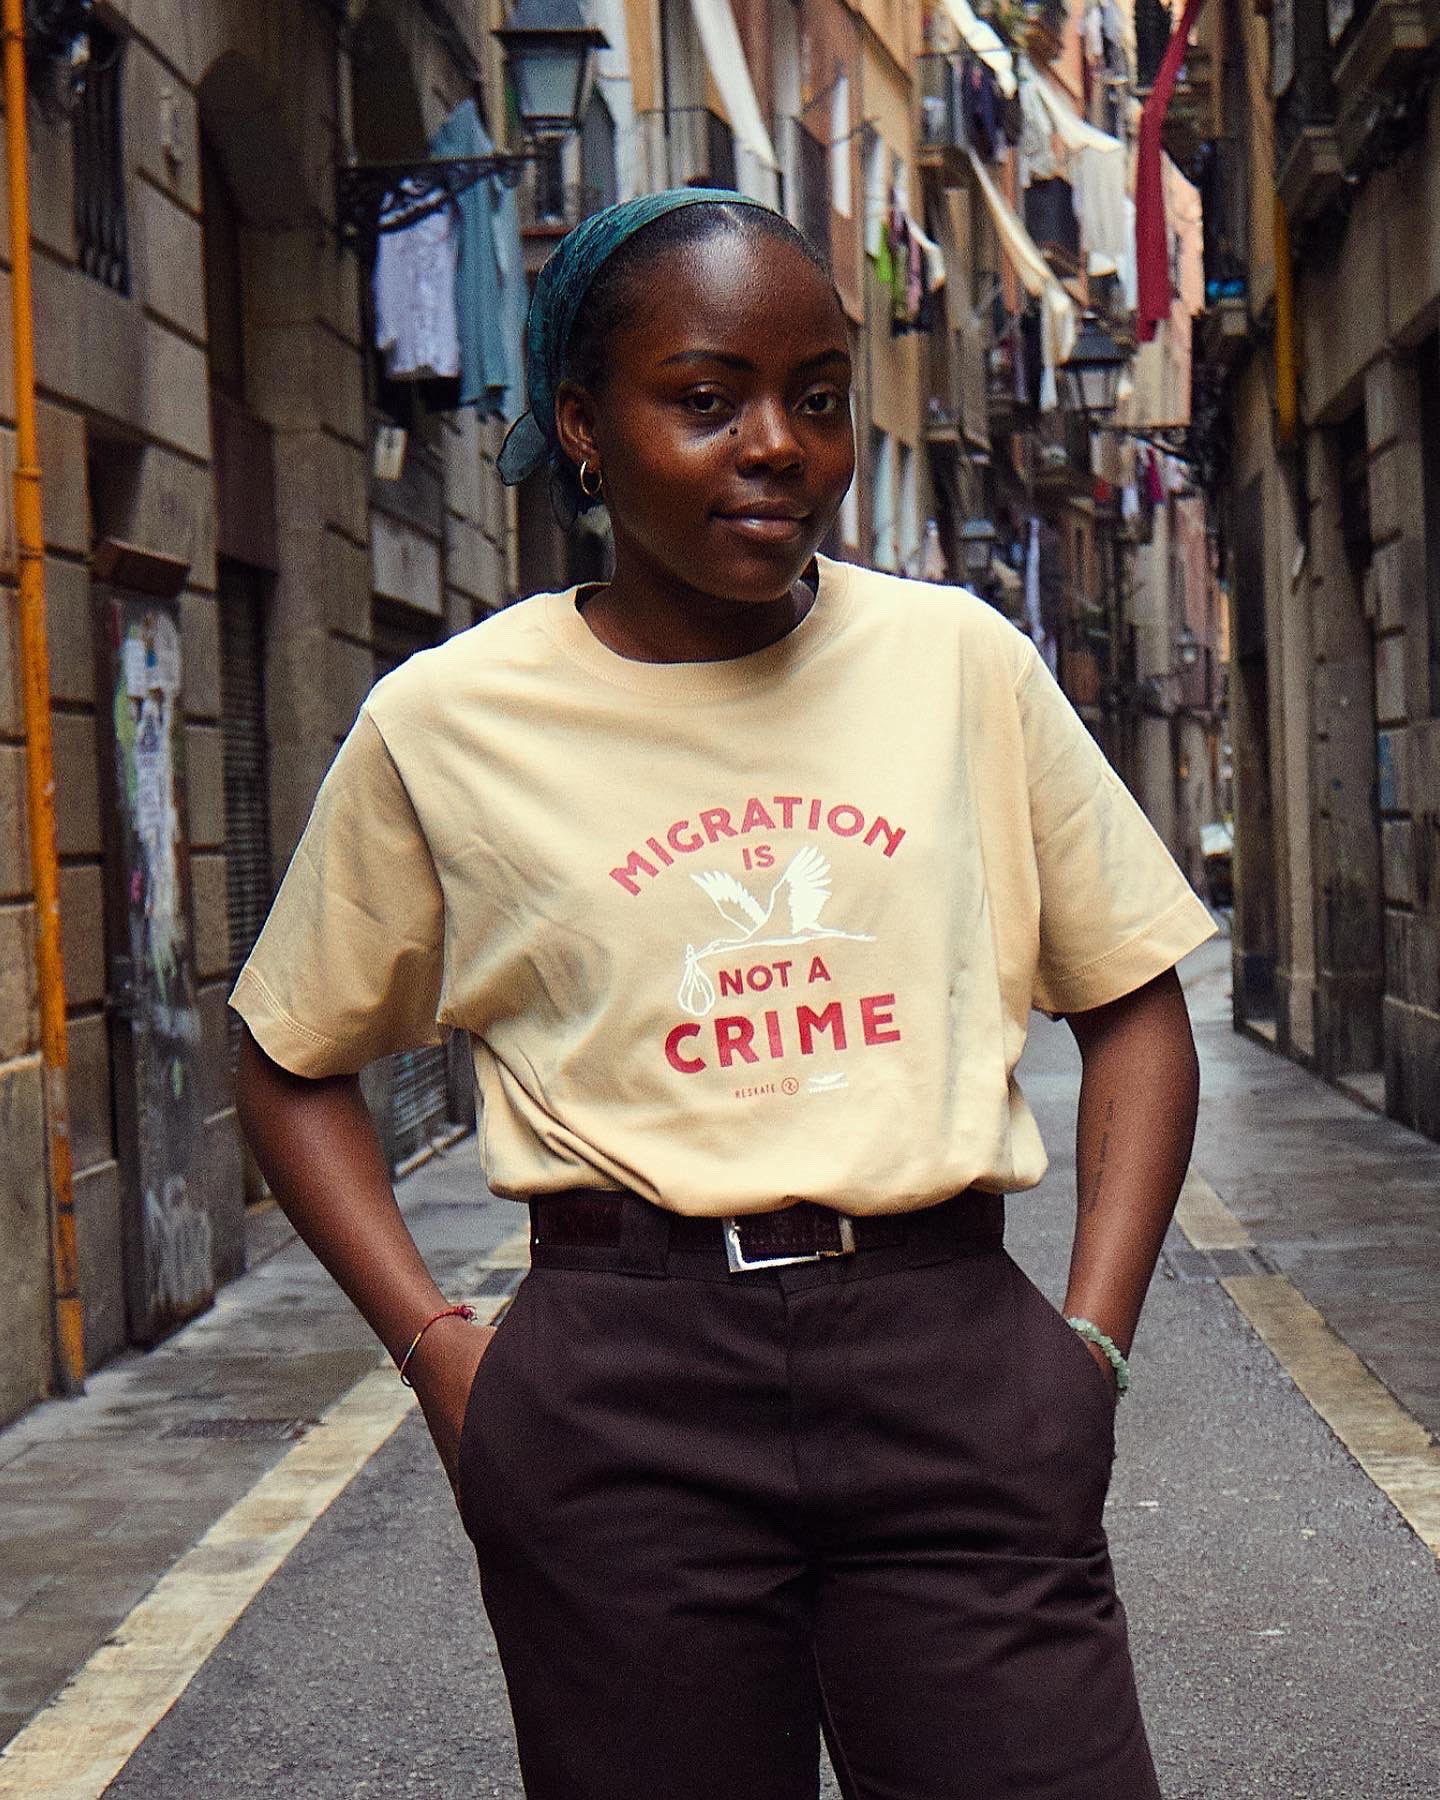 A young Black woman wears a shirt that reads "Migration is not a Crime"